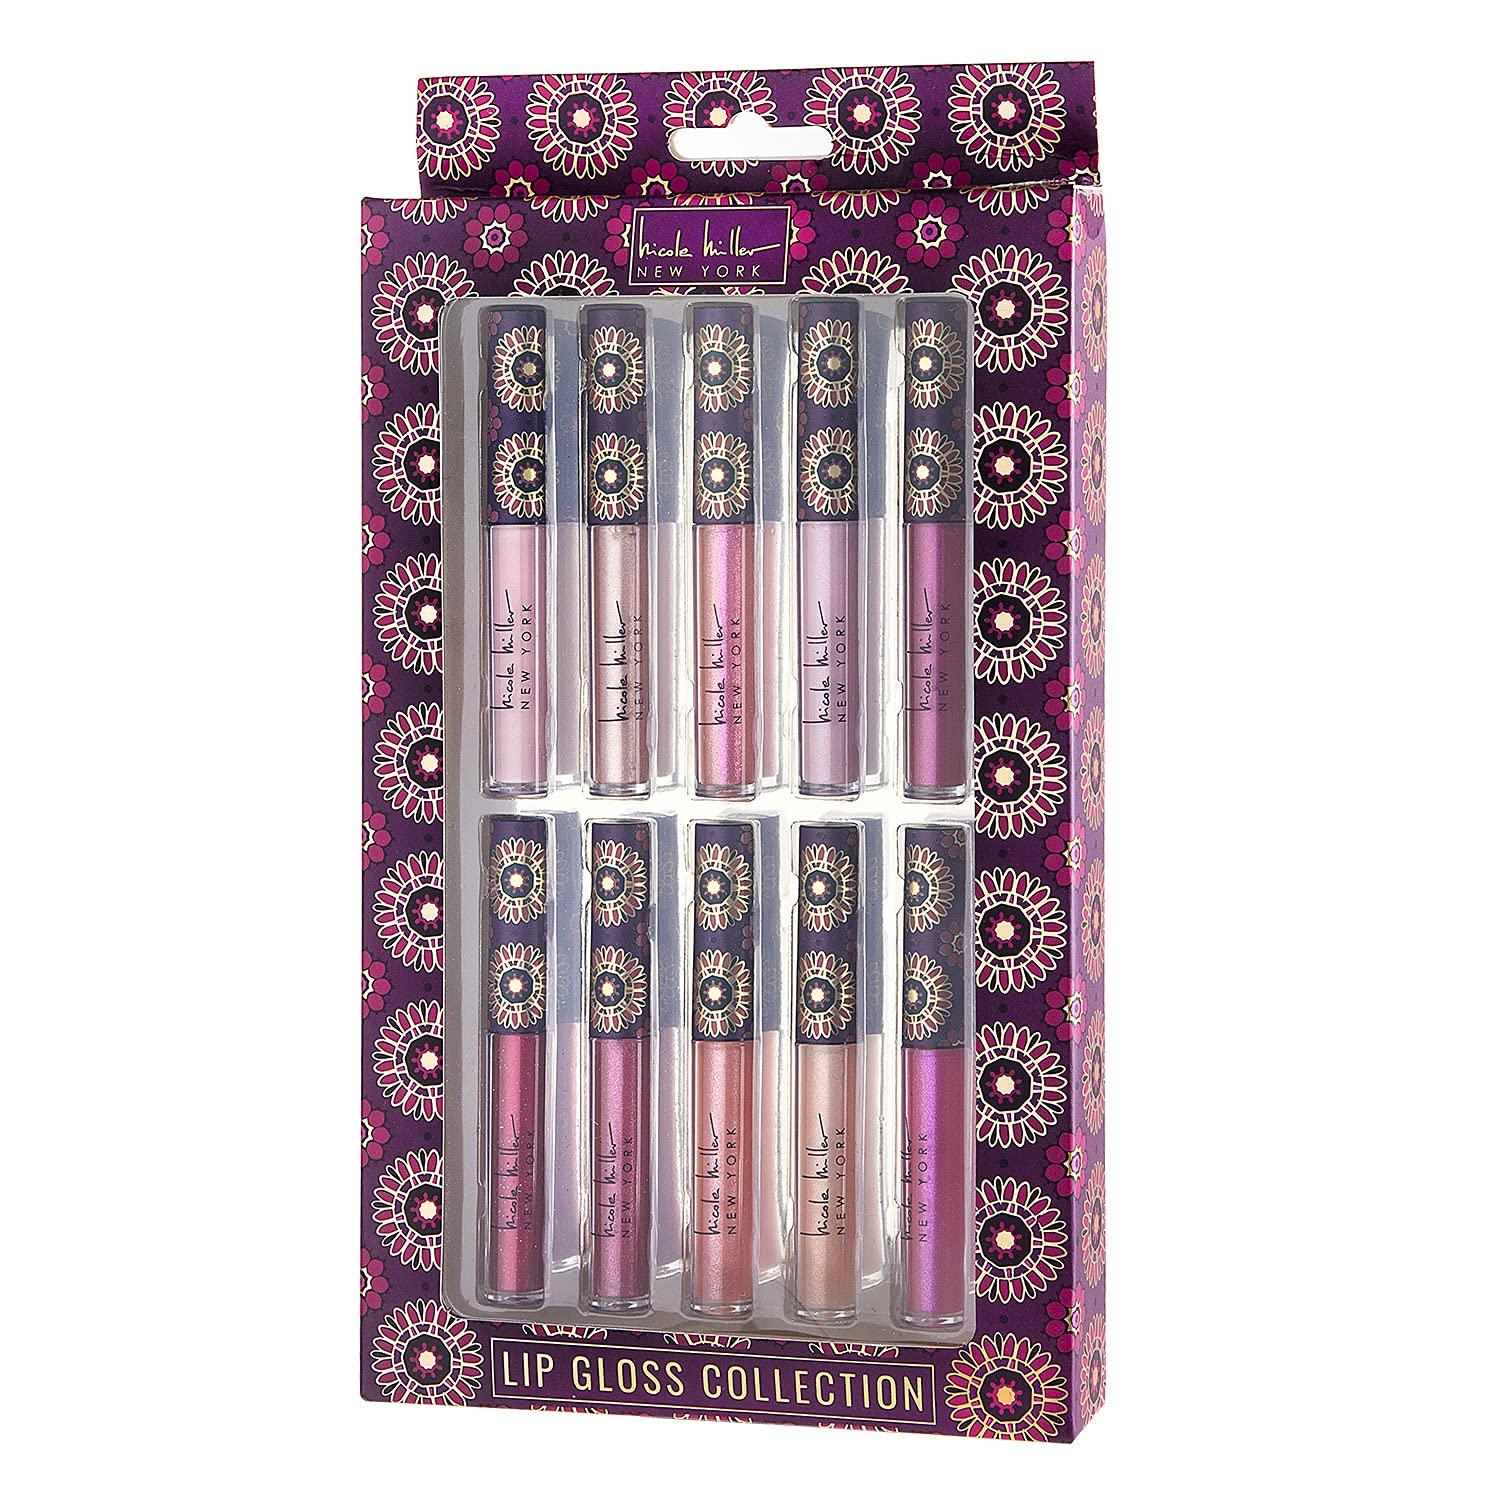 Nicole Miller 10 Pc Lip Gloss Collection, Shimmery Lip Glosses for